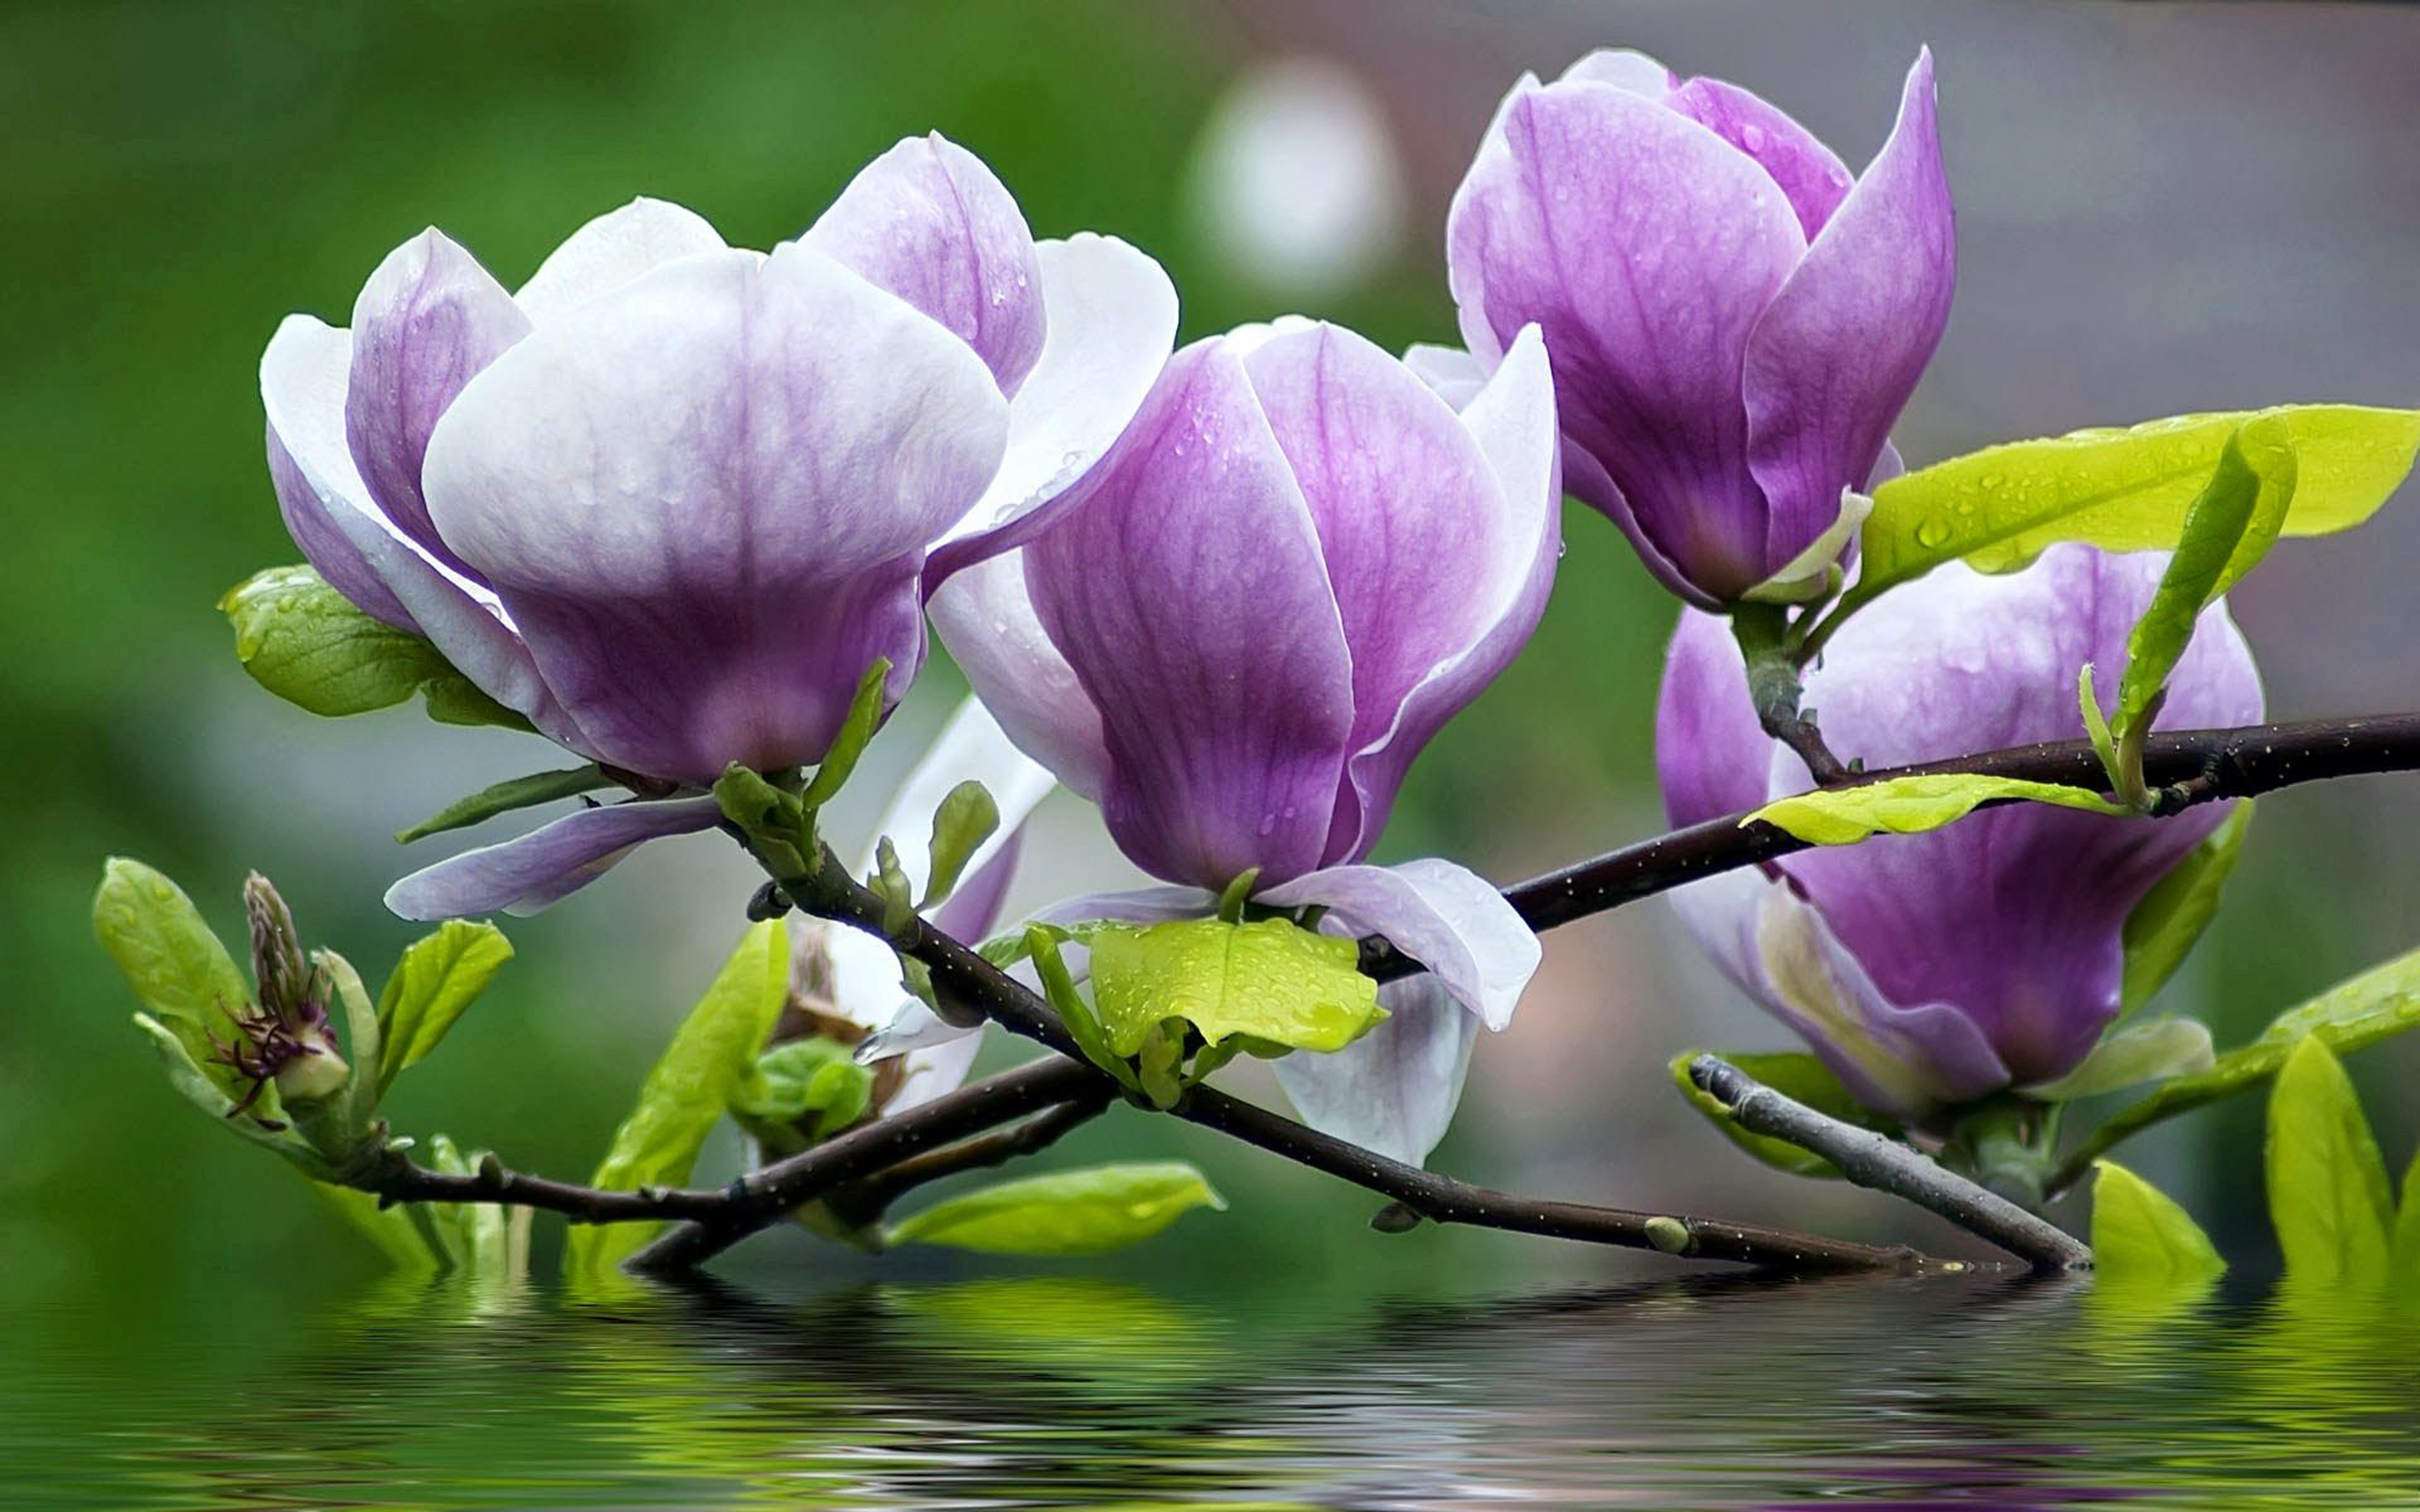 Magnolia Purple Flowers Twigs With Green Leaves Water Desktop Wallpaper Hd For Mobile Phones And